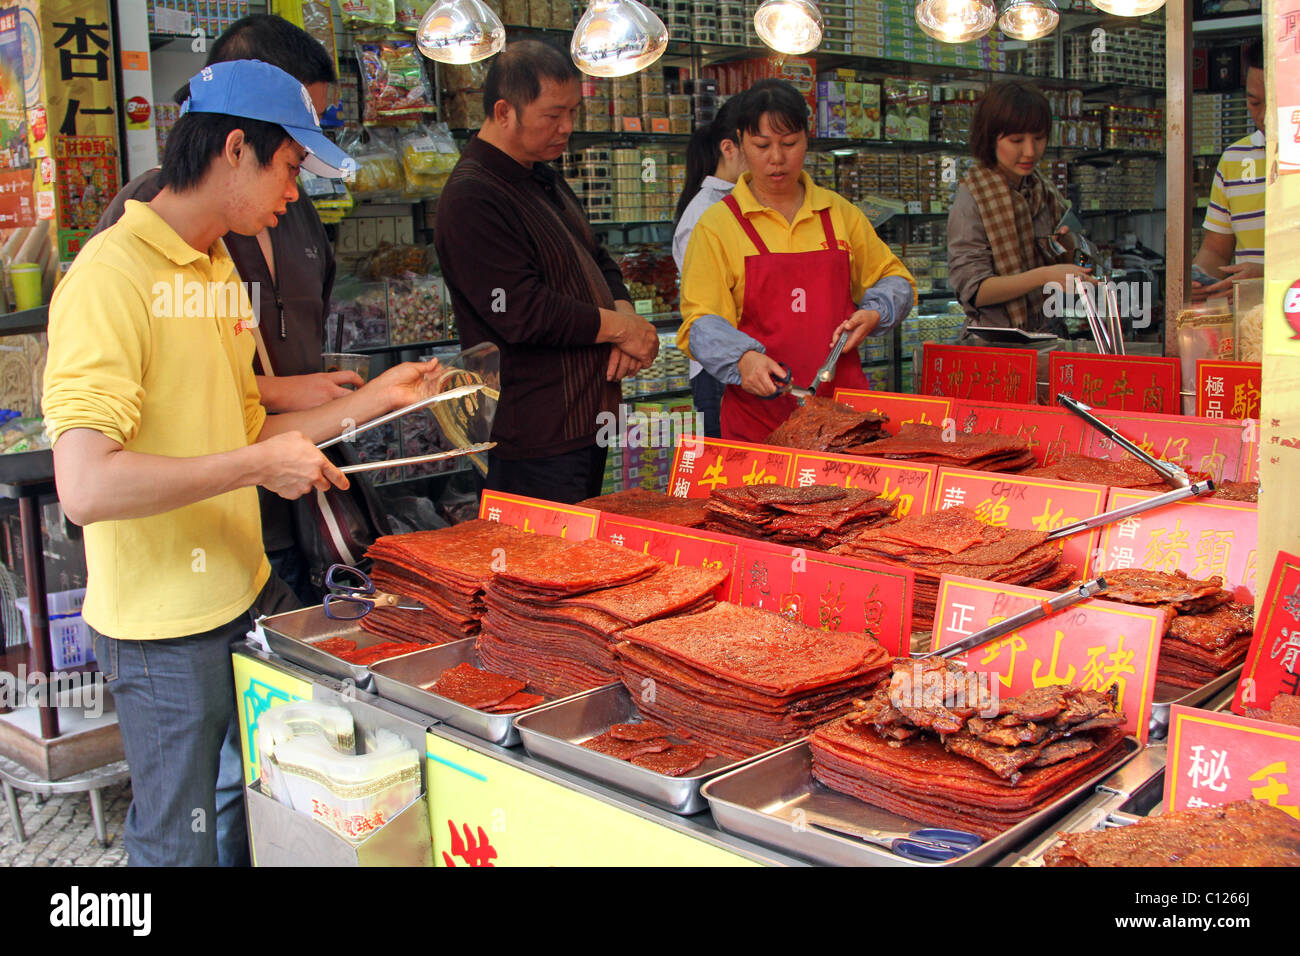 Barbecued meat slab stall in Macau, China.This traditional food is similar to beef jerky slabs. Stock Photo